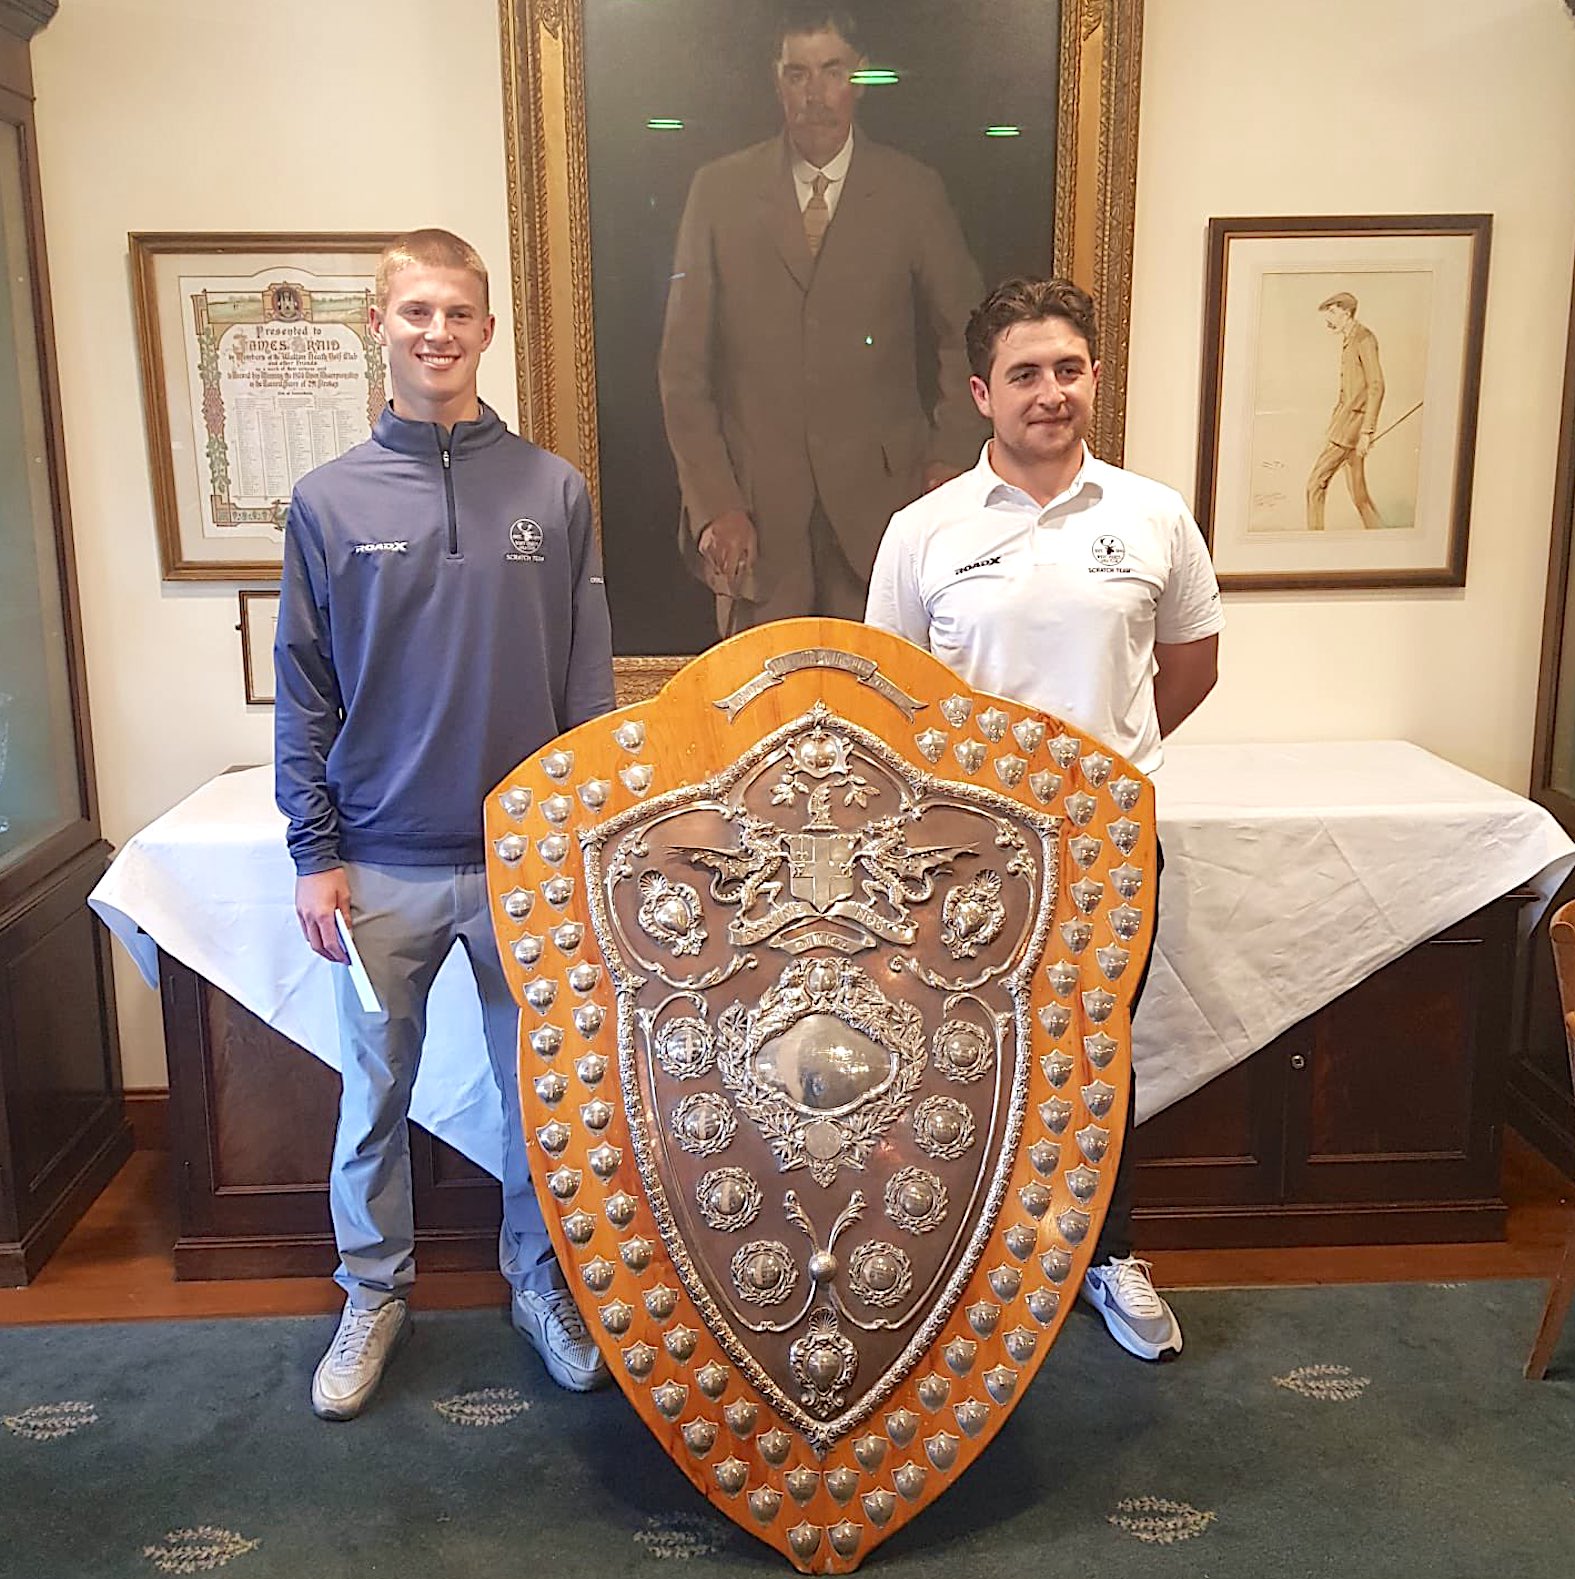 Zach Little (left) and Sean Kelly with the London Amateur Foursomes Trophy